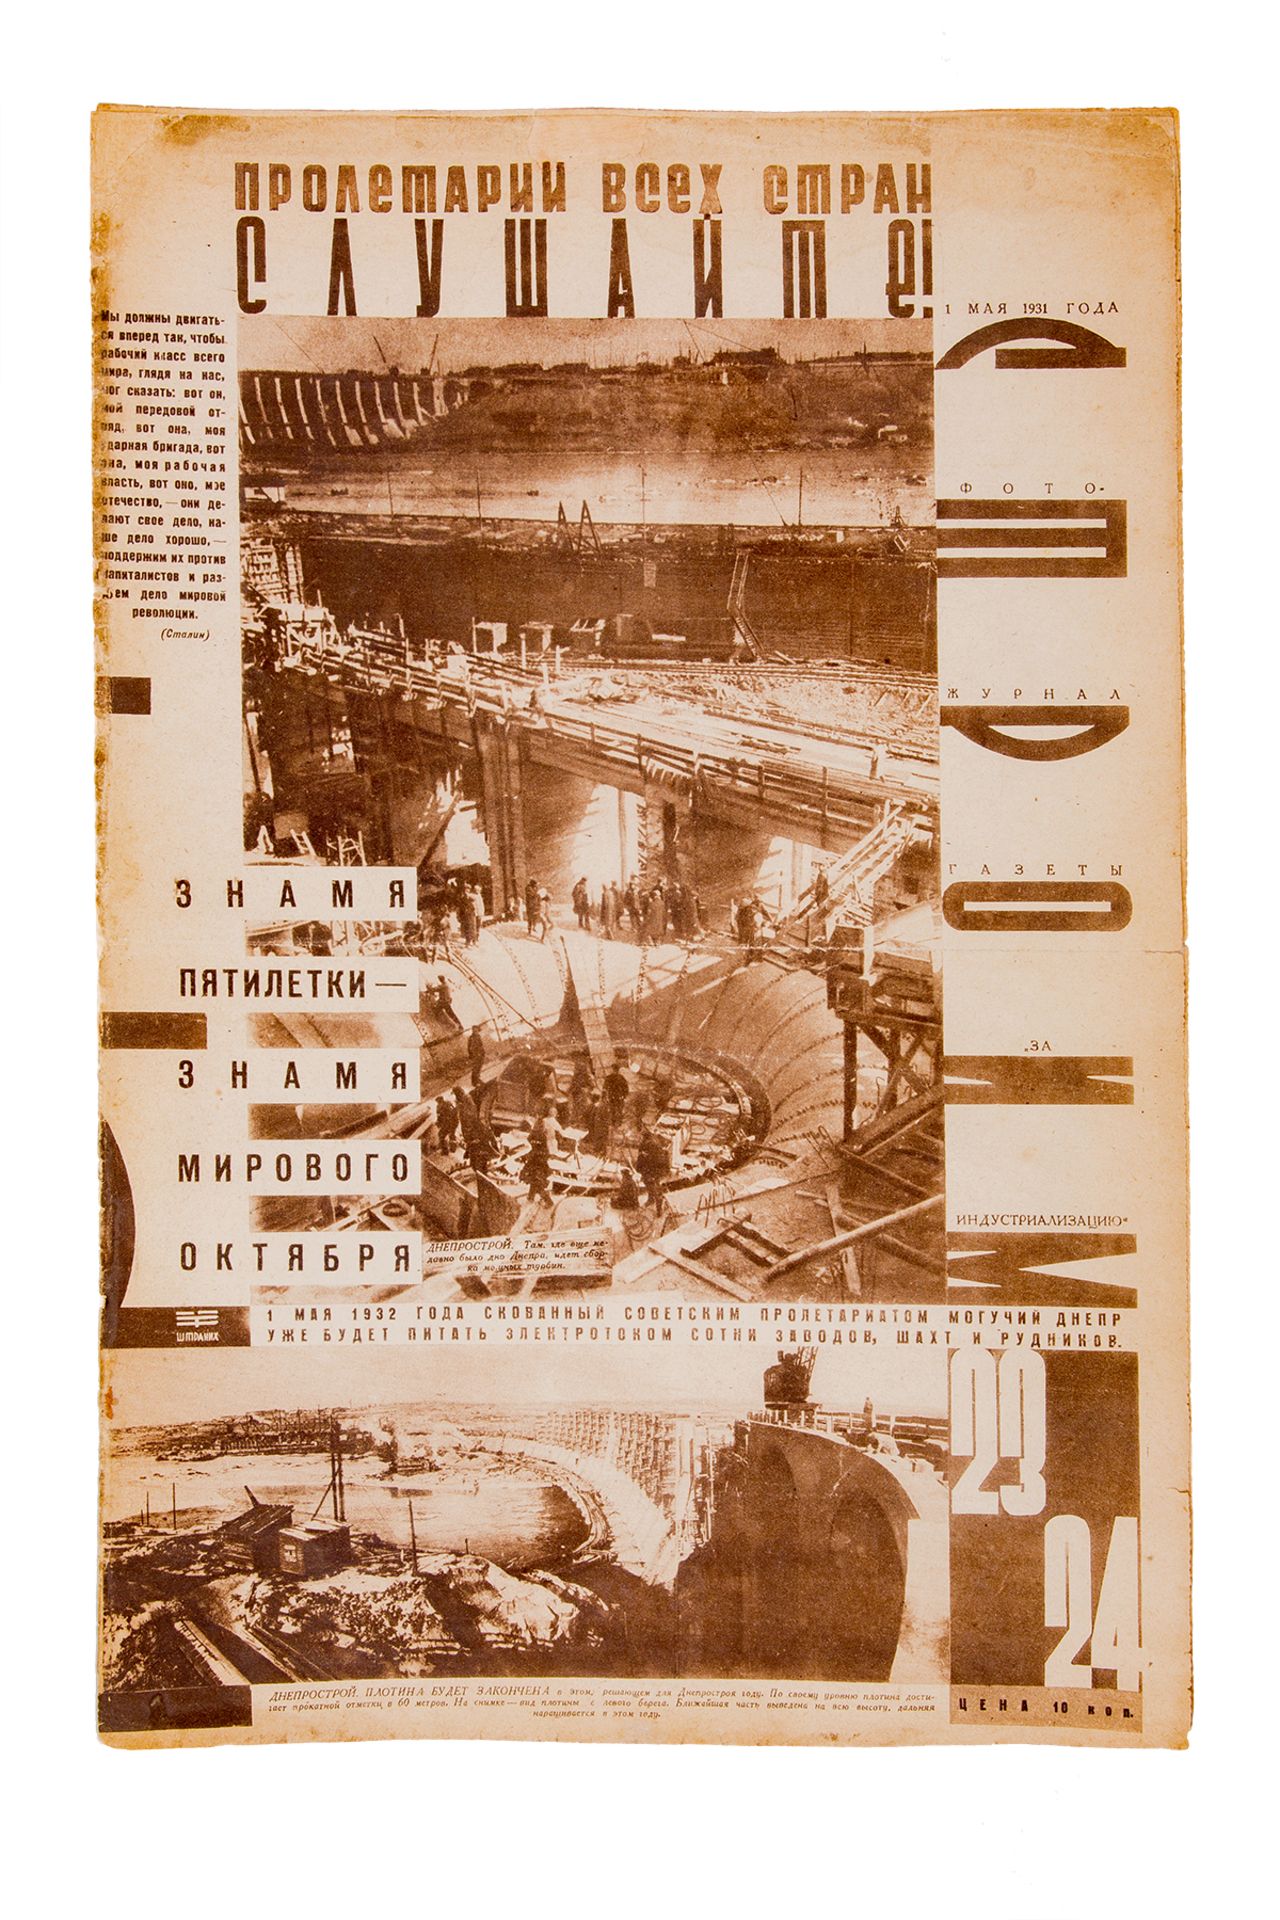 [Soviet] We Build: Photo-Magazine of â€˜The Pros of Industrializationâ€™ Newspaper. No. 23-24, May 1